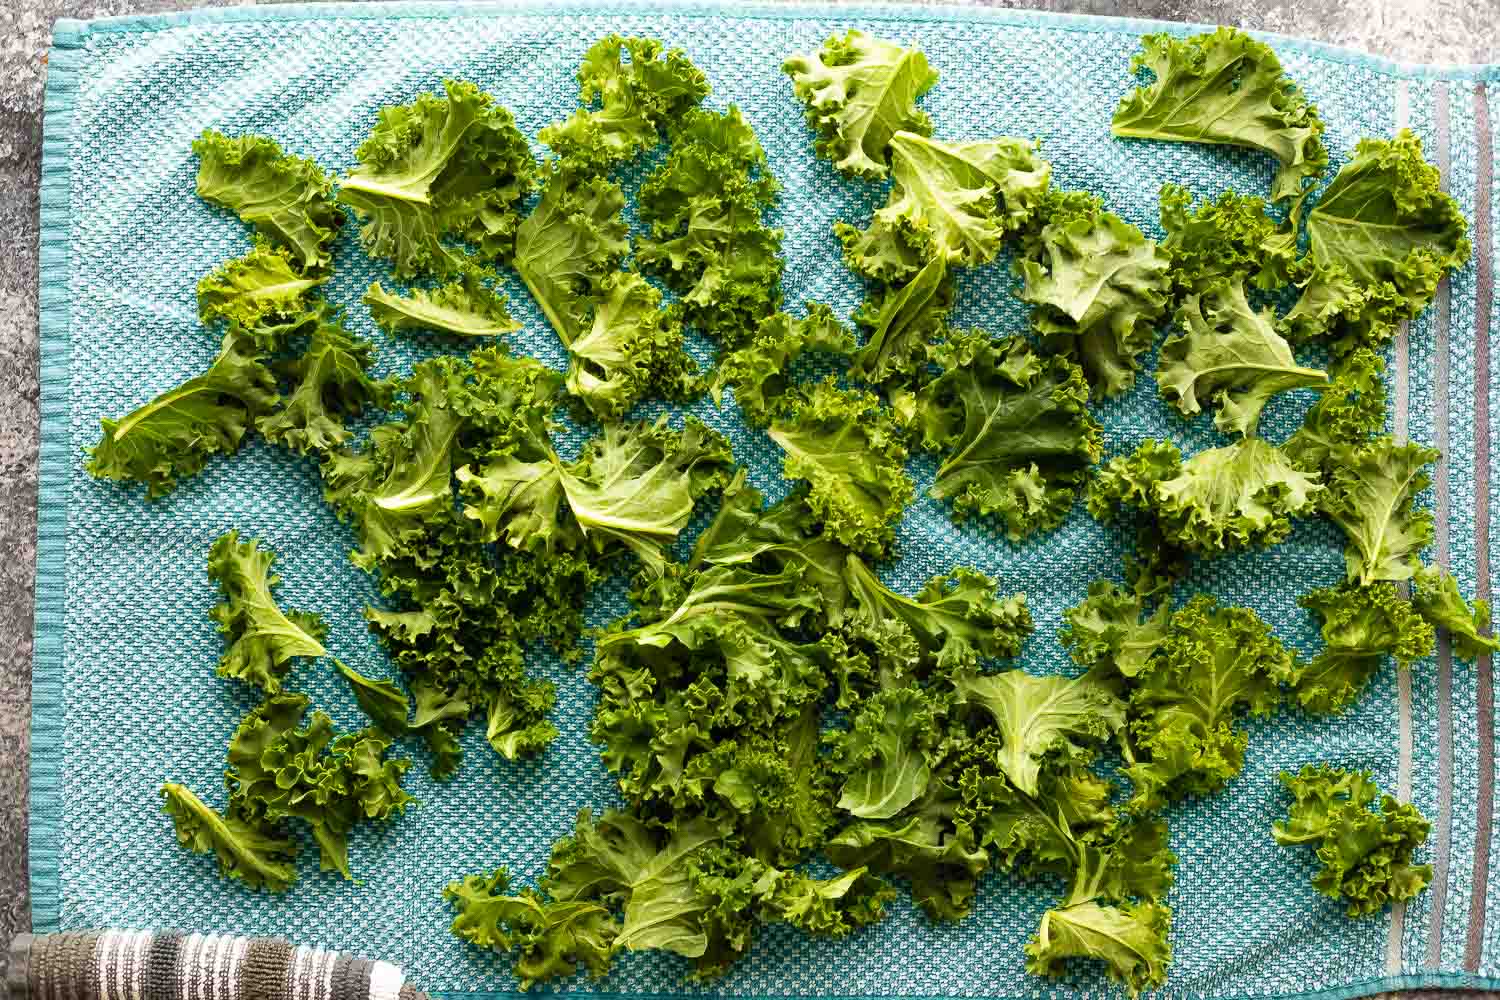 kale broken into bits and spread out on towel